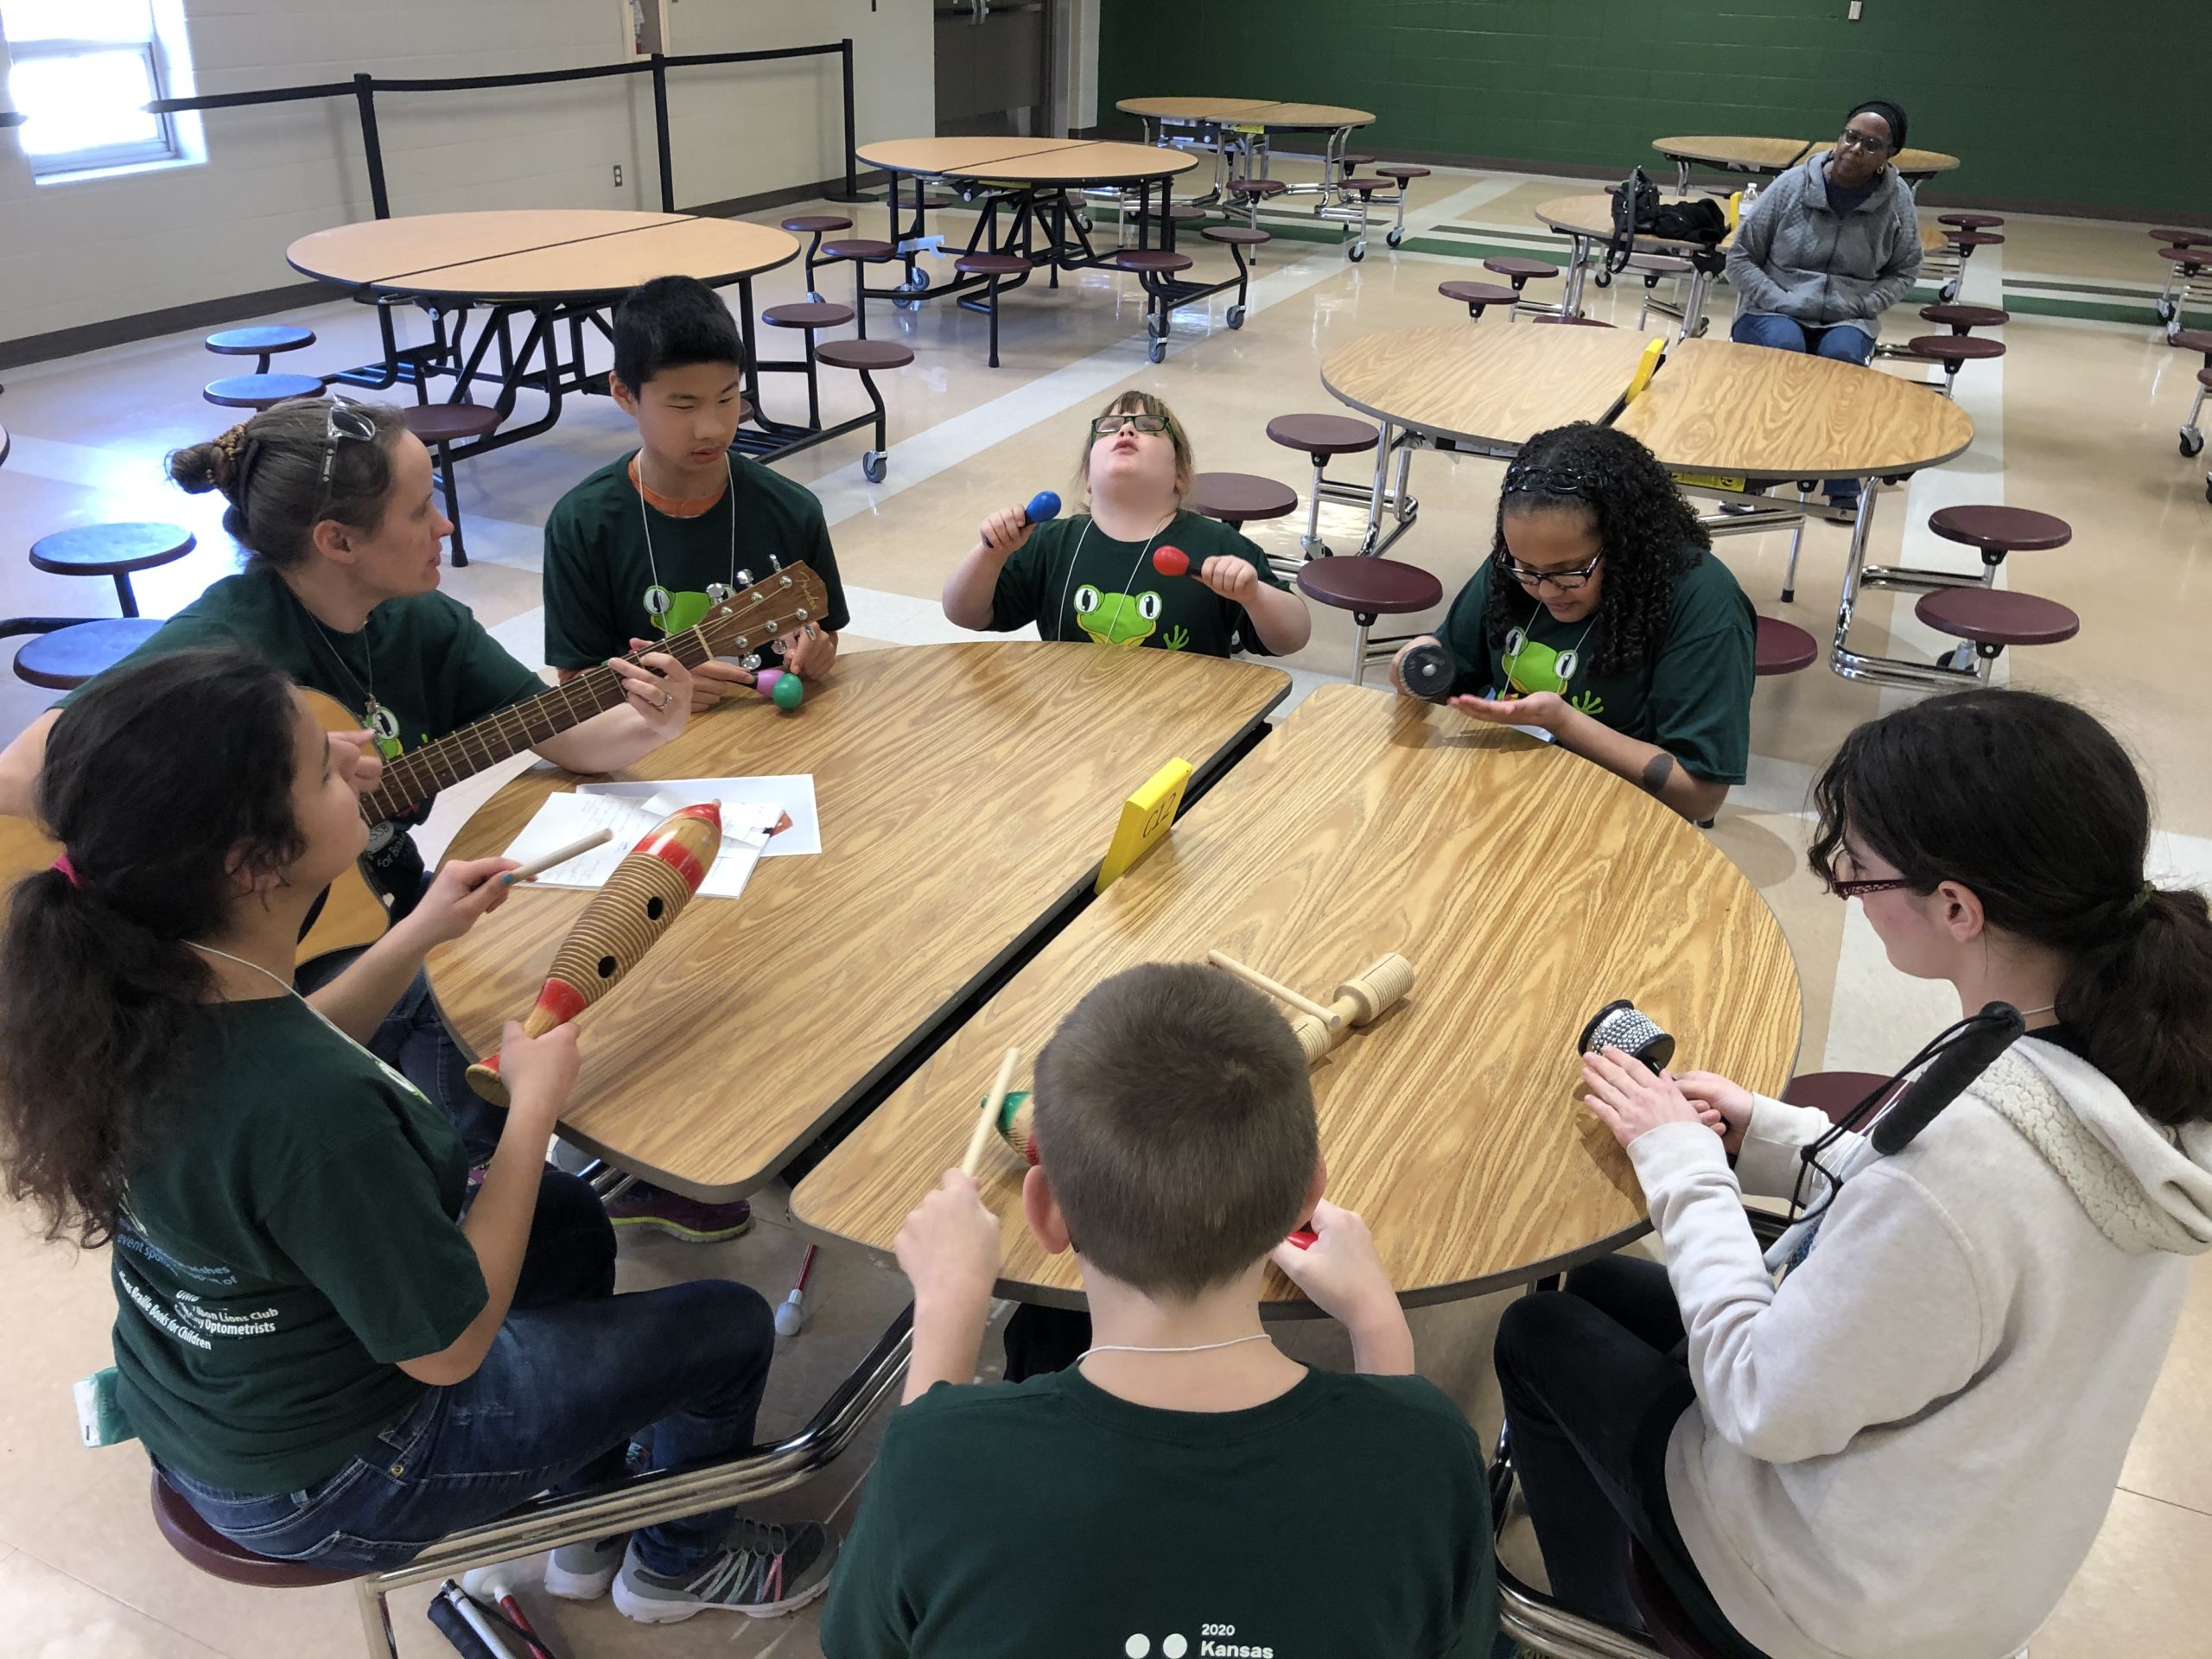 Several students wearing braille challenge shirts sitting around a circular table and holding musical instruments.